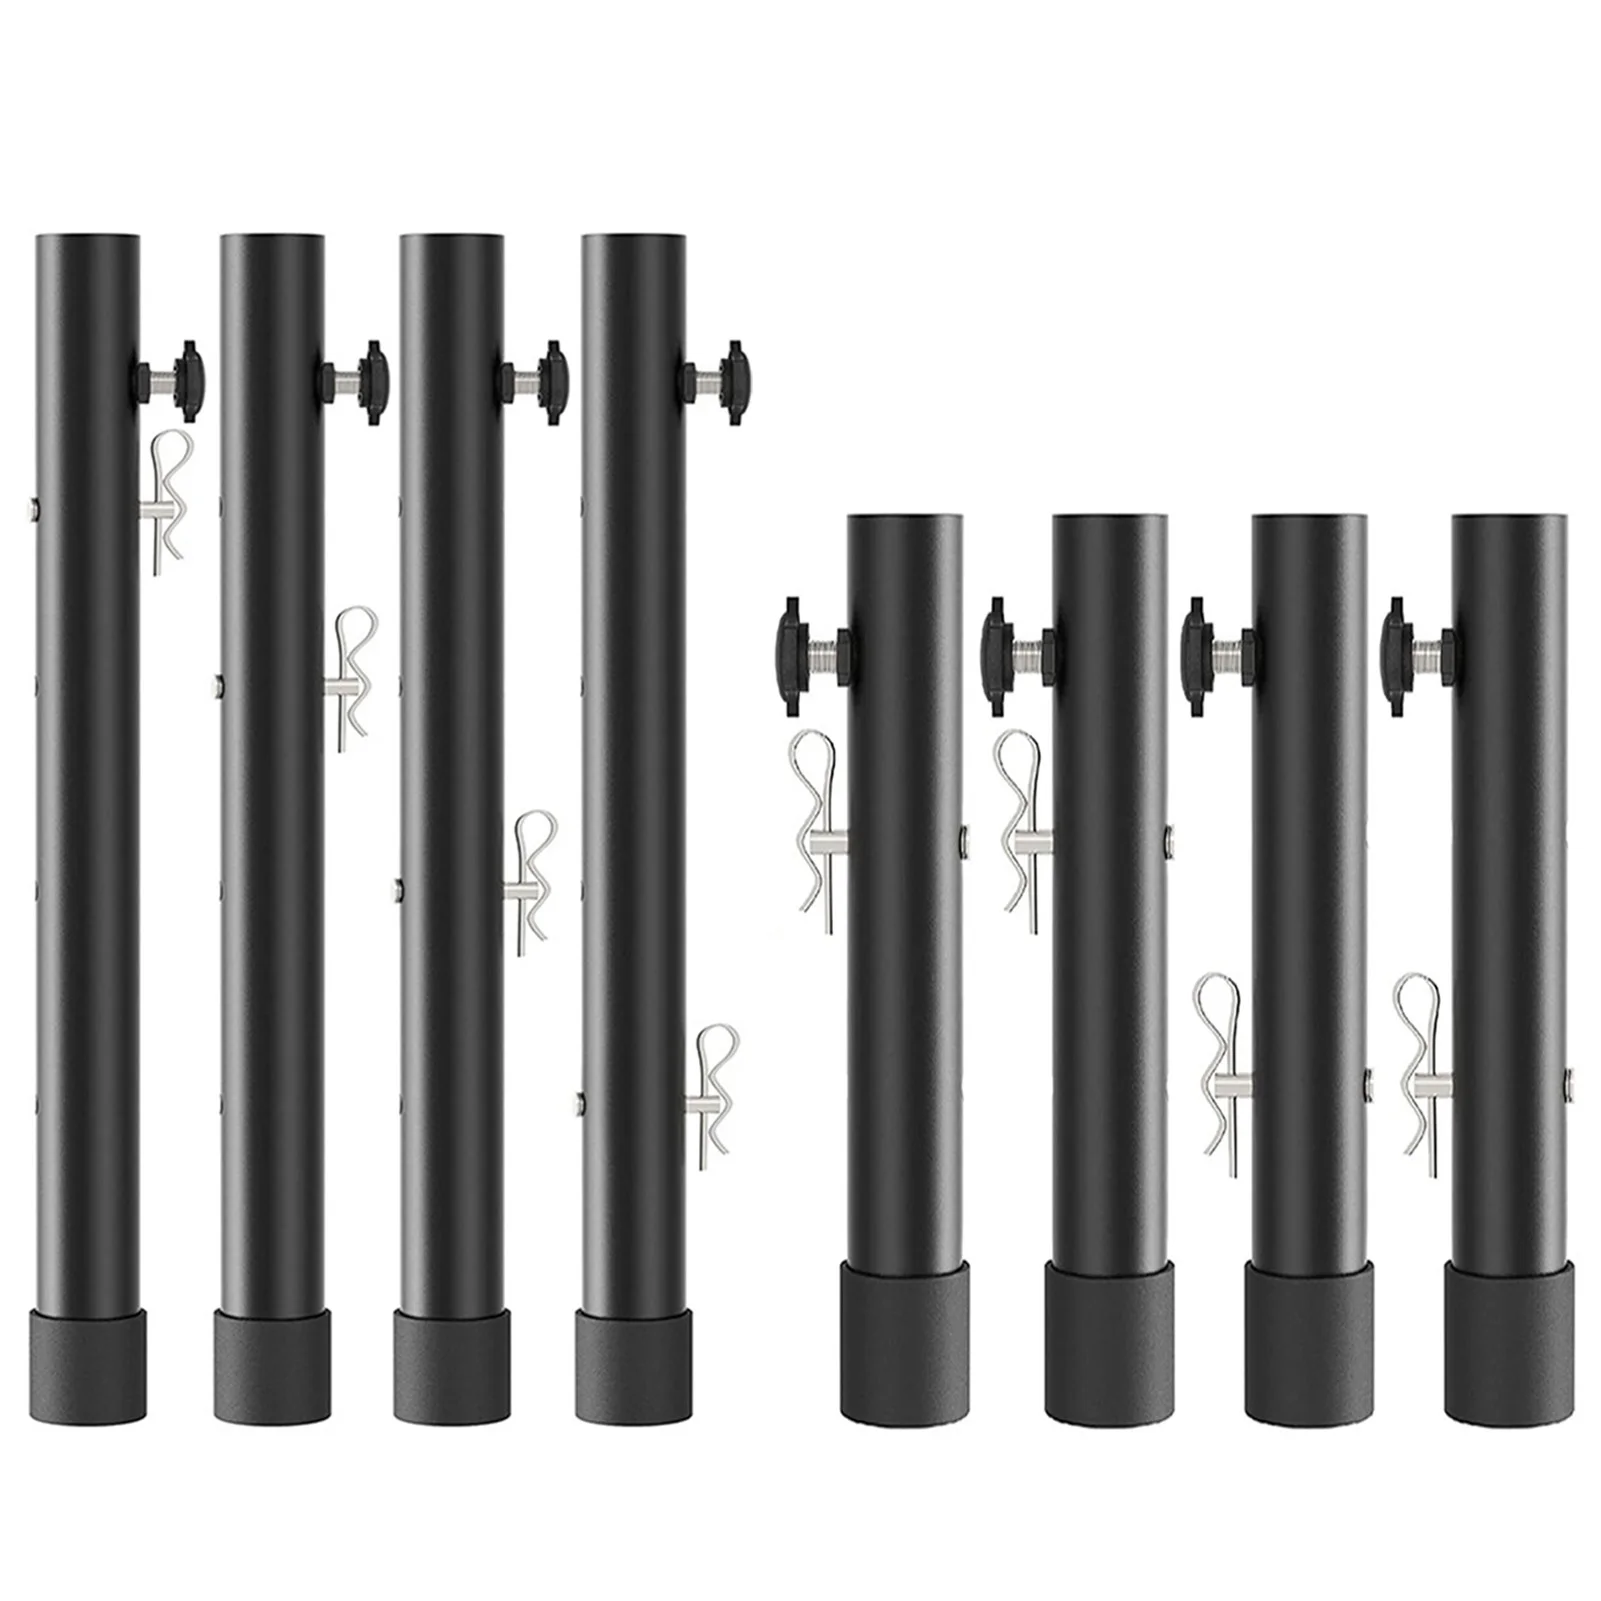 

4pcs Folding Table Leg Risers Black Adjustable Table Height Extenders for Straight and Bent Legs